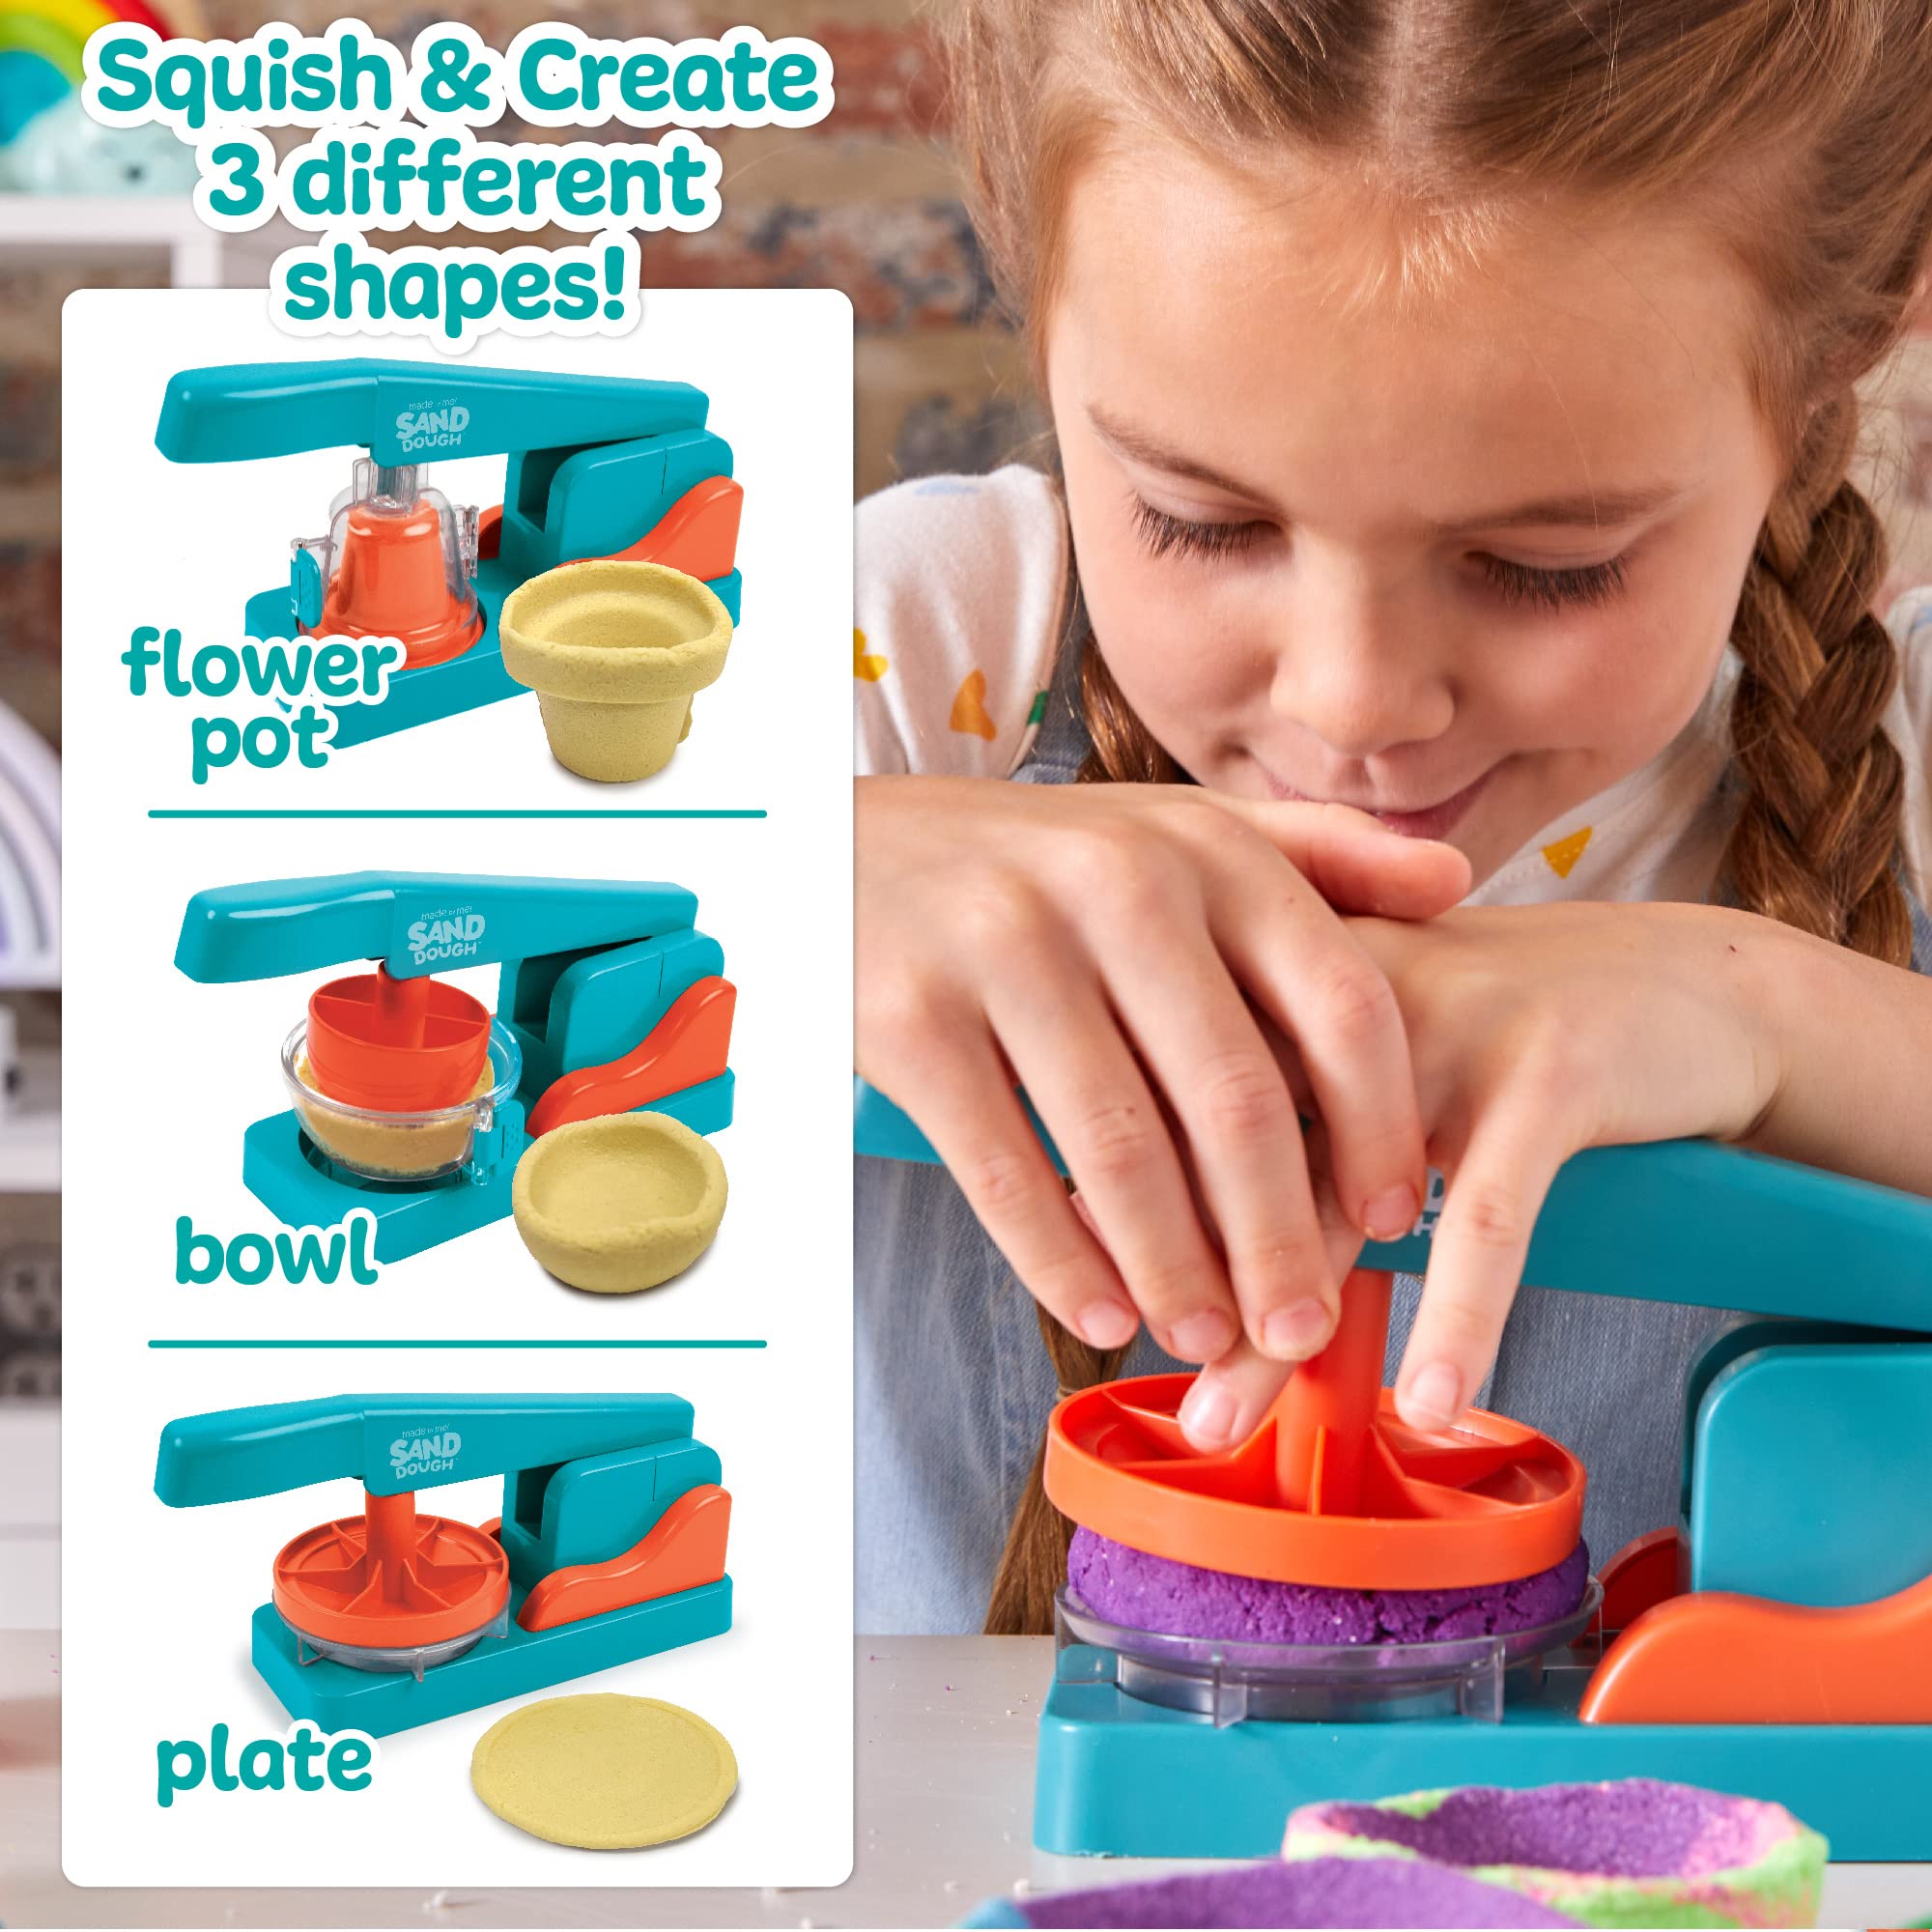 Made By Me! Sand Dough Sculpt & Paint Creations! Pottery Press, Sand Dough Bowl Kit, Paint & Create Your Own Pottery, Mess-Free Pottery Kit for Kids, Great Arts & Craft Activity for Ages 6, 7, 8, 9